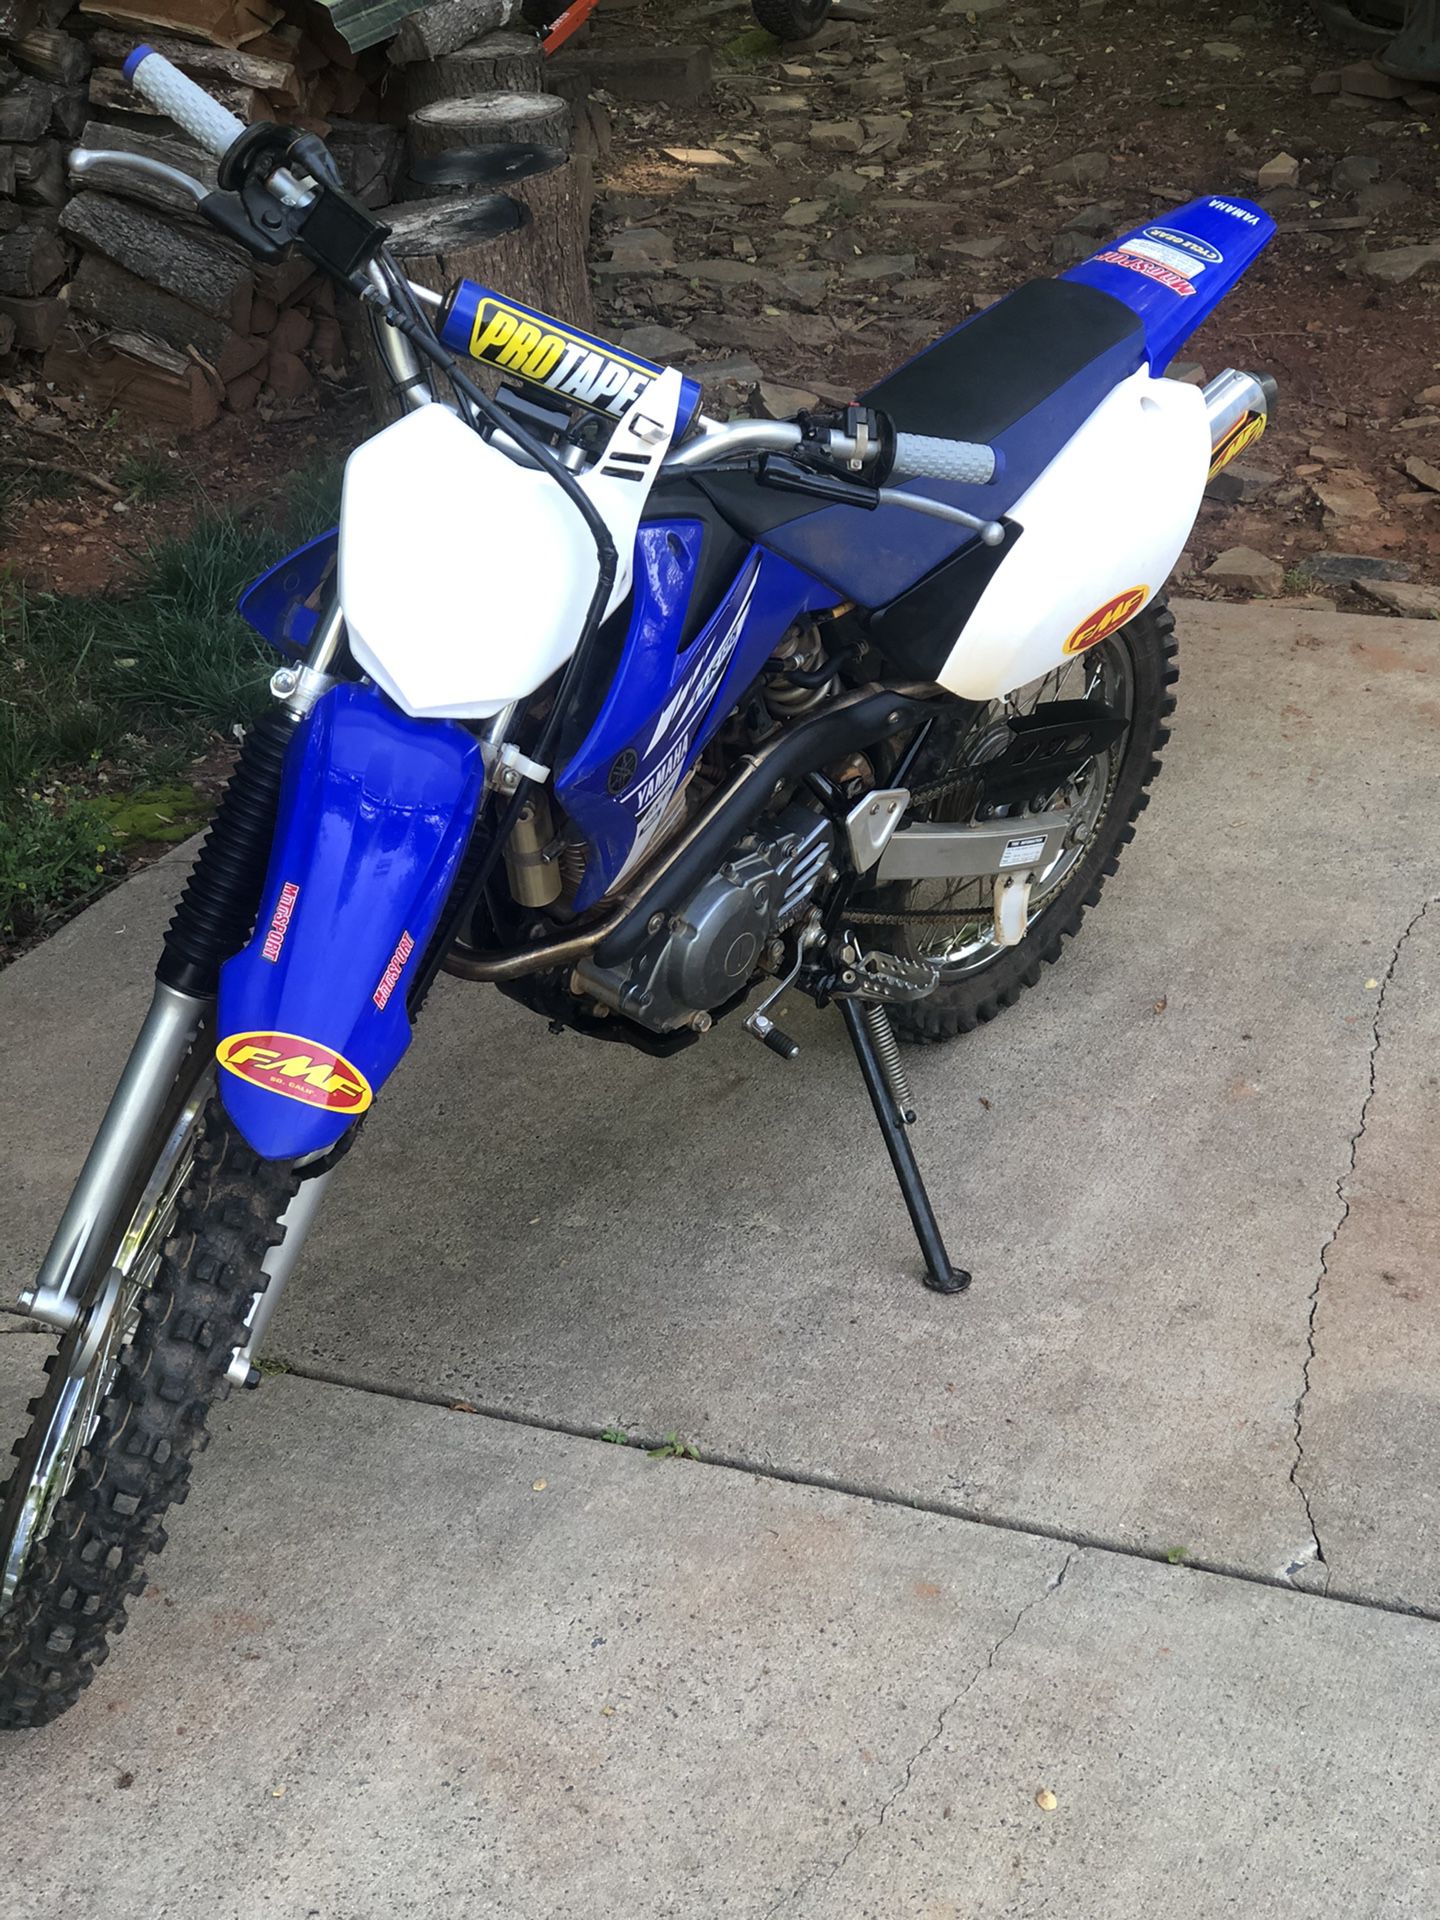 17 Yamaha Ttr 125 For Sale In Charlotte Nc Offerup